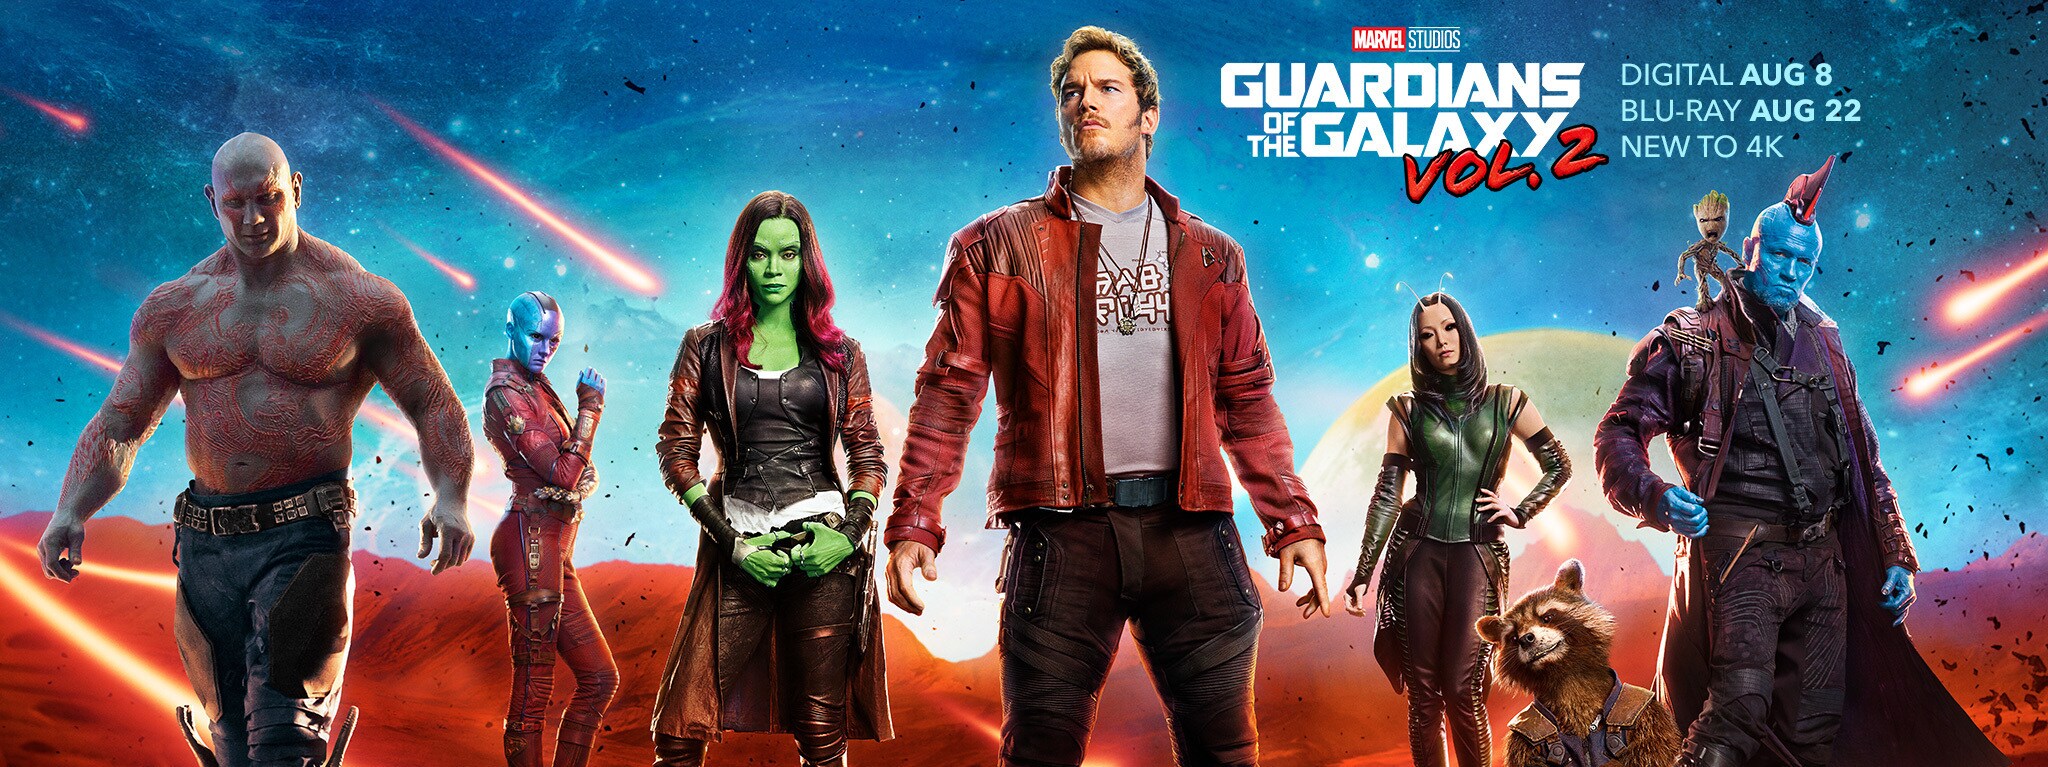 James Gunn Releases The Entire Guardians Of The Galaxy Vol